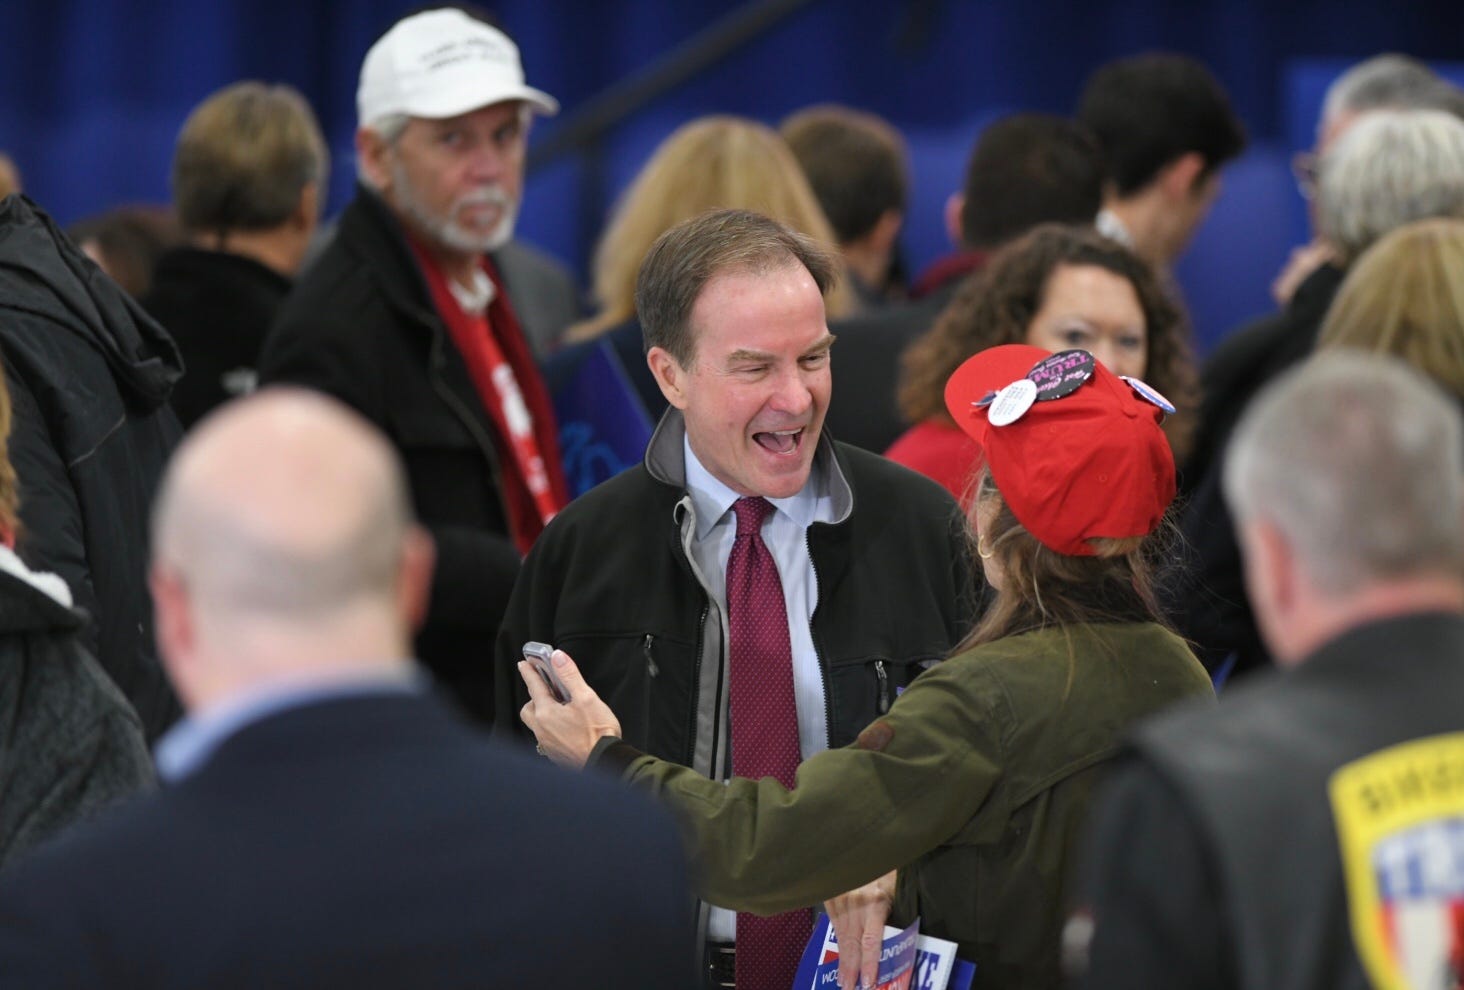 Michigan Gubernatorial candidate Bill Schuette greets attendees at a rally featuring Vice President Mike Pence at the Oakland County airport, in Waterford on Monday, October 29, 2018.